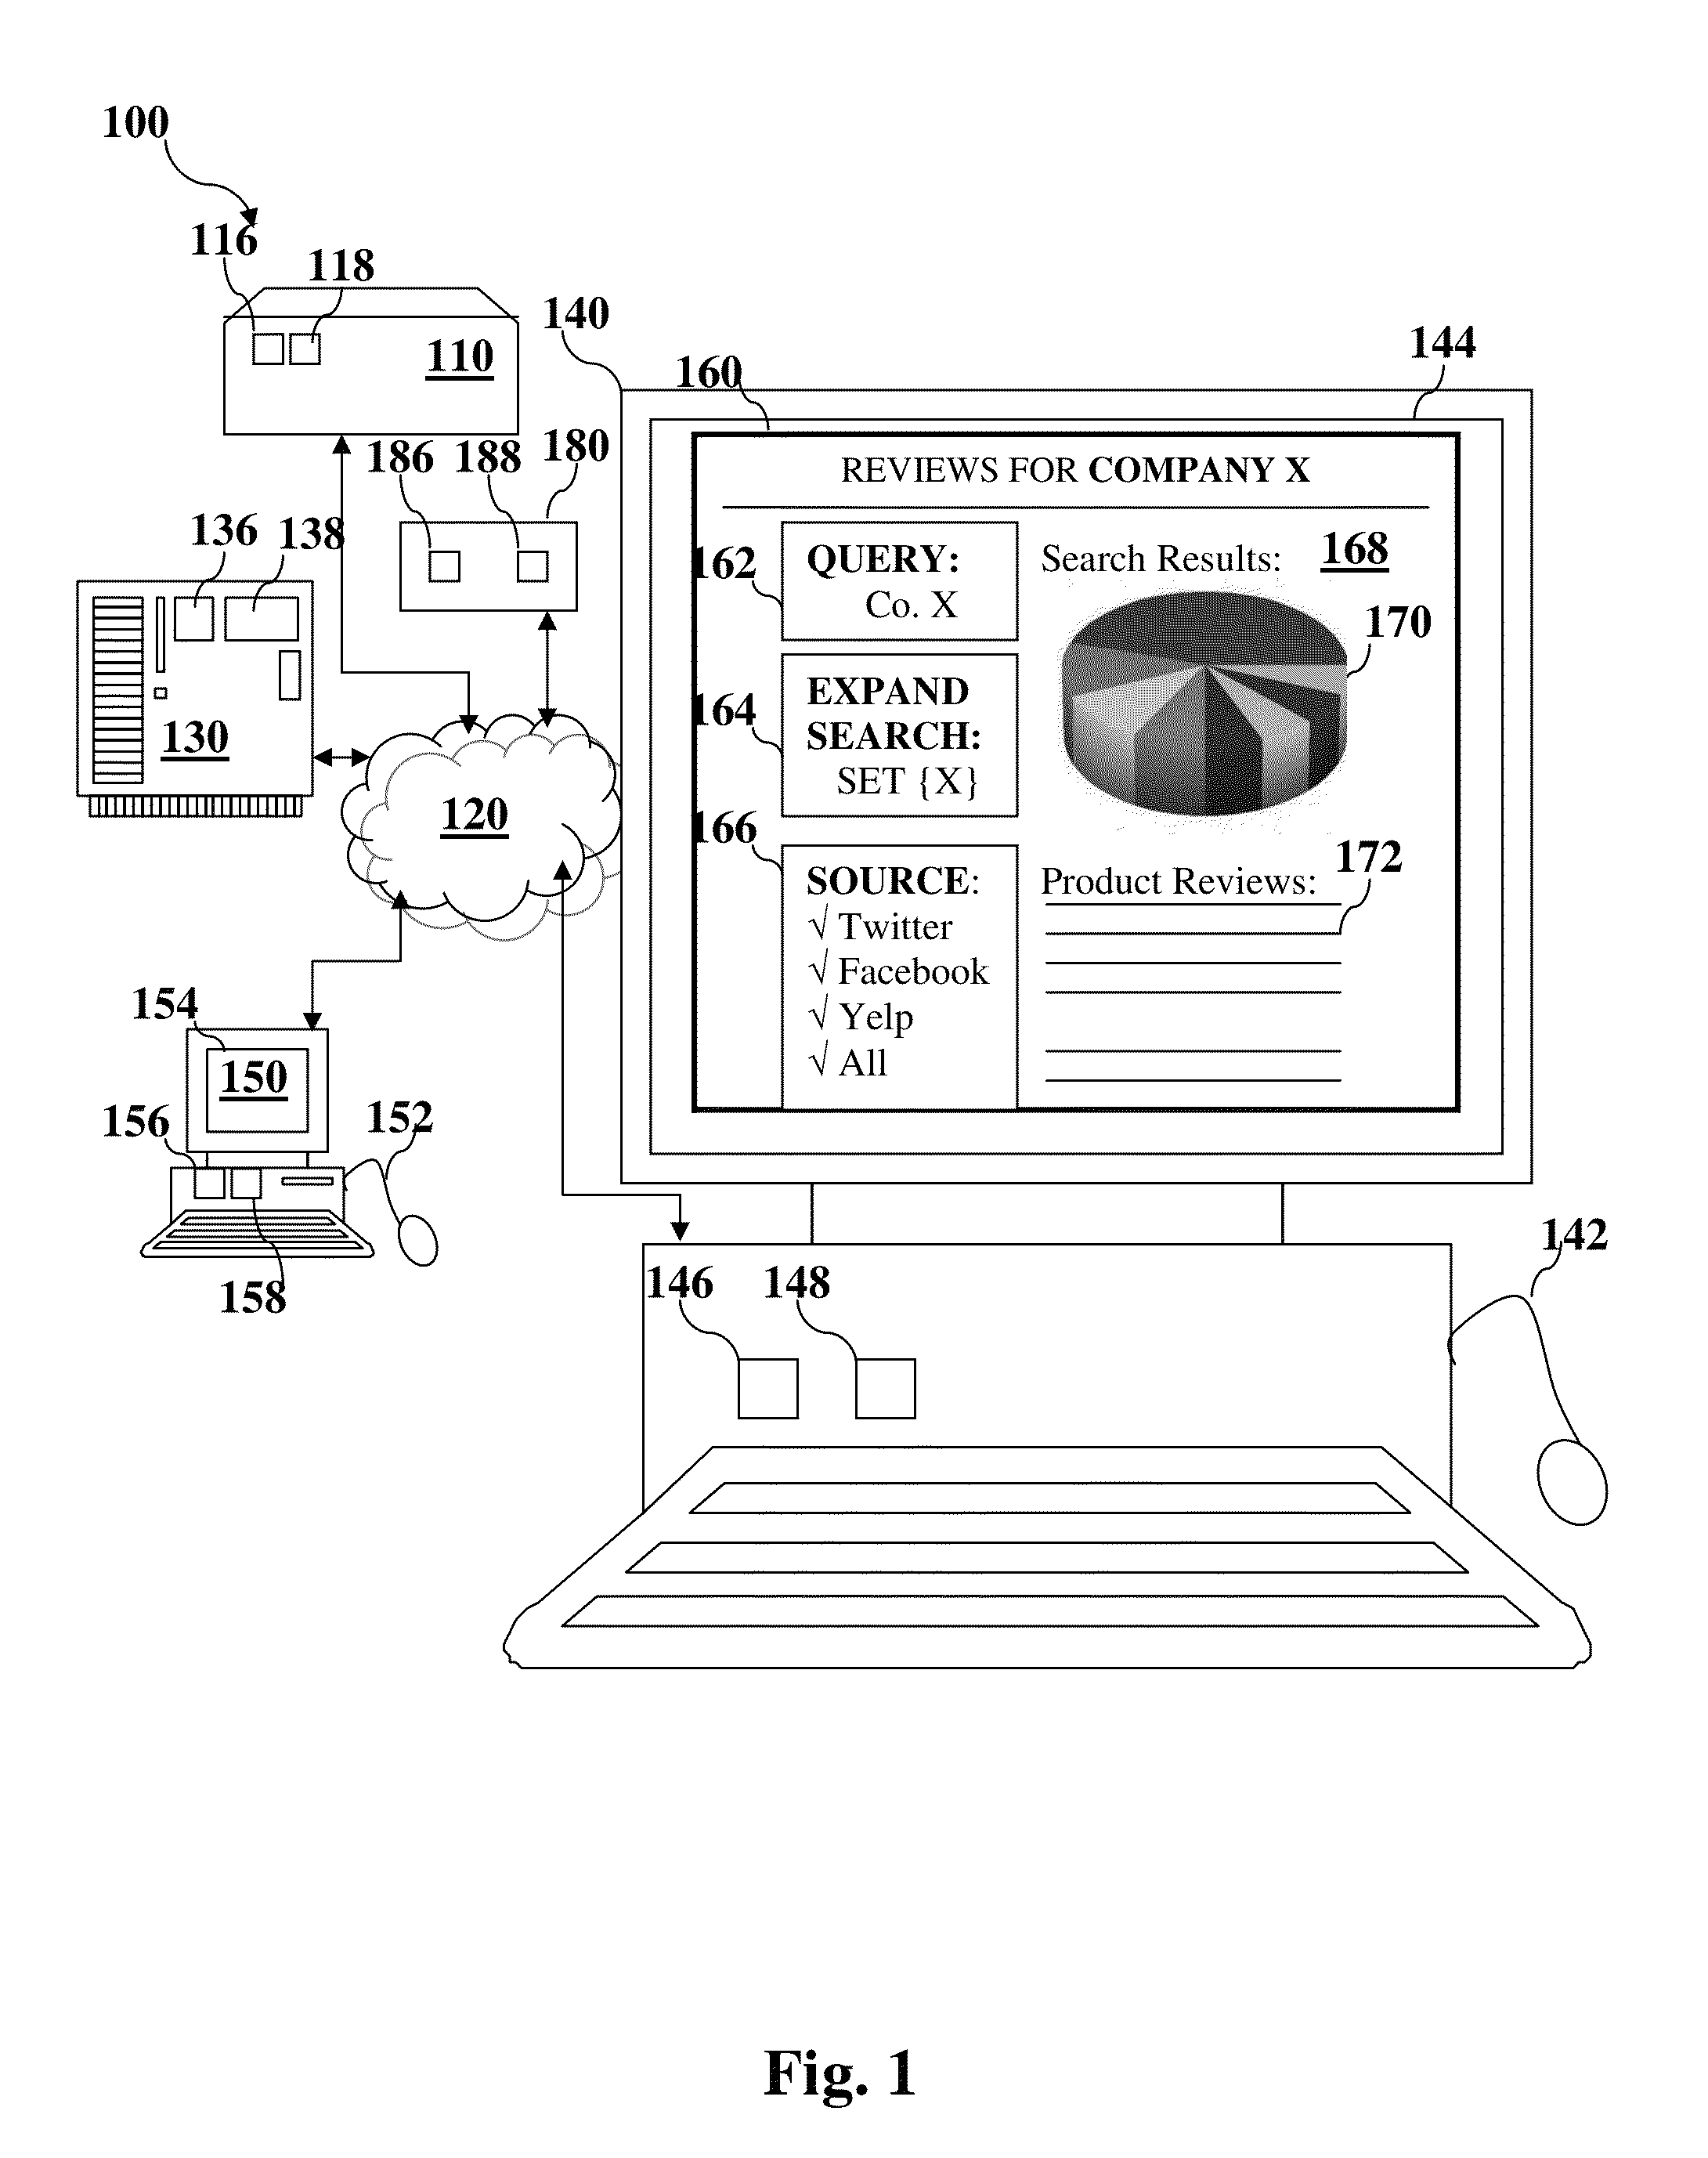 System and method for identifying social media interactions